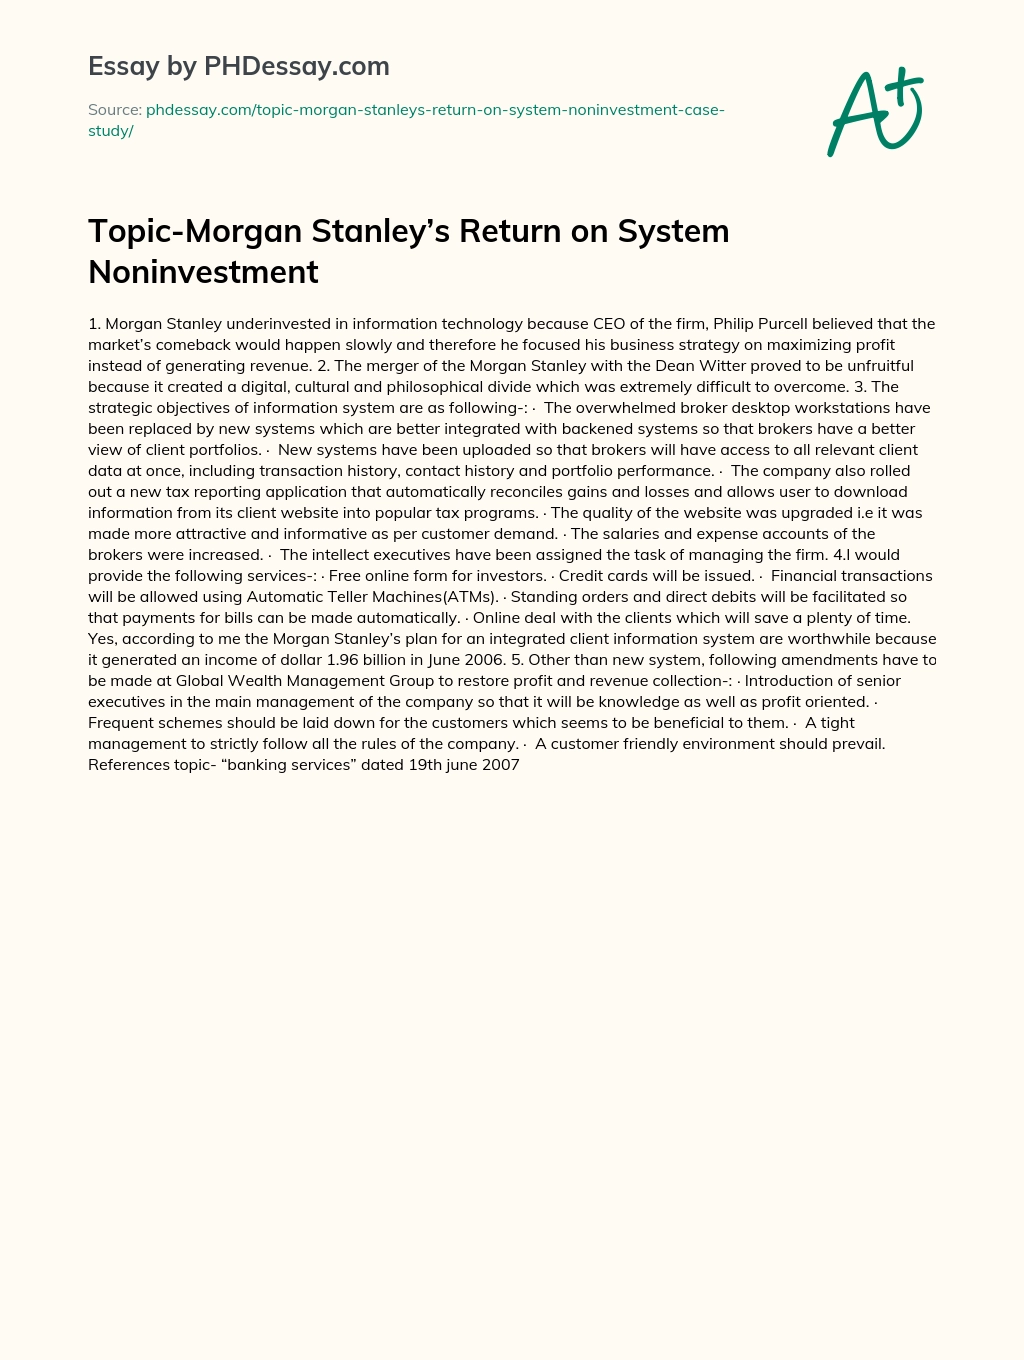 Topic-Morgan Stanley’s  Return on System Noninvestment essay